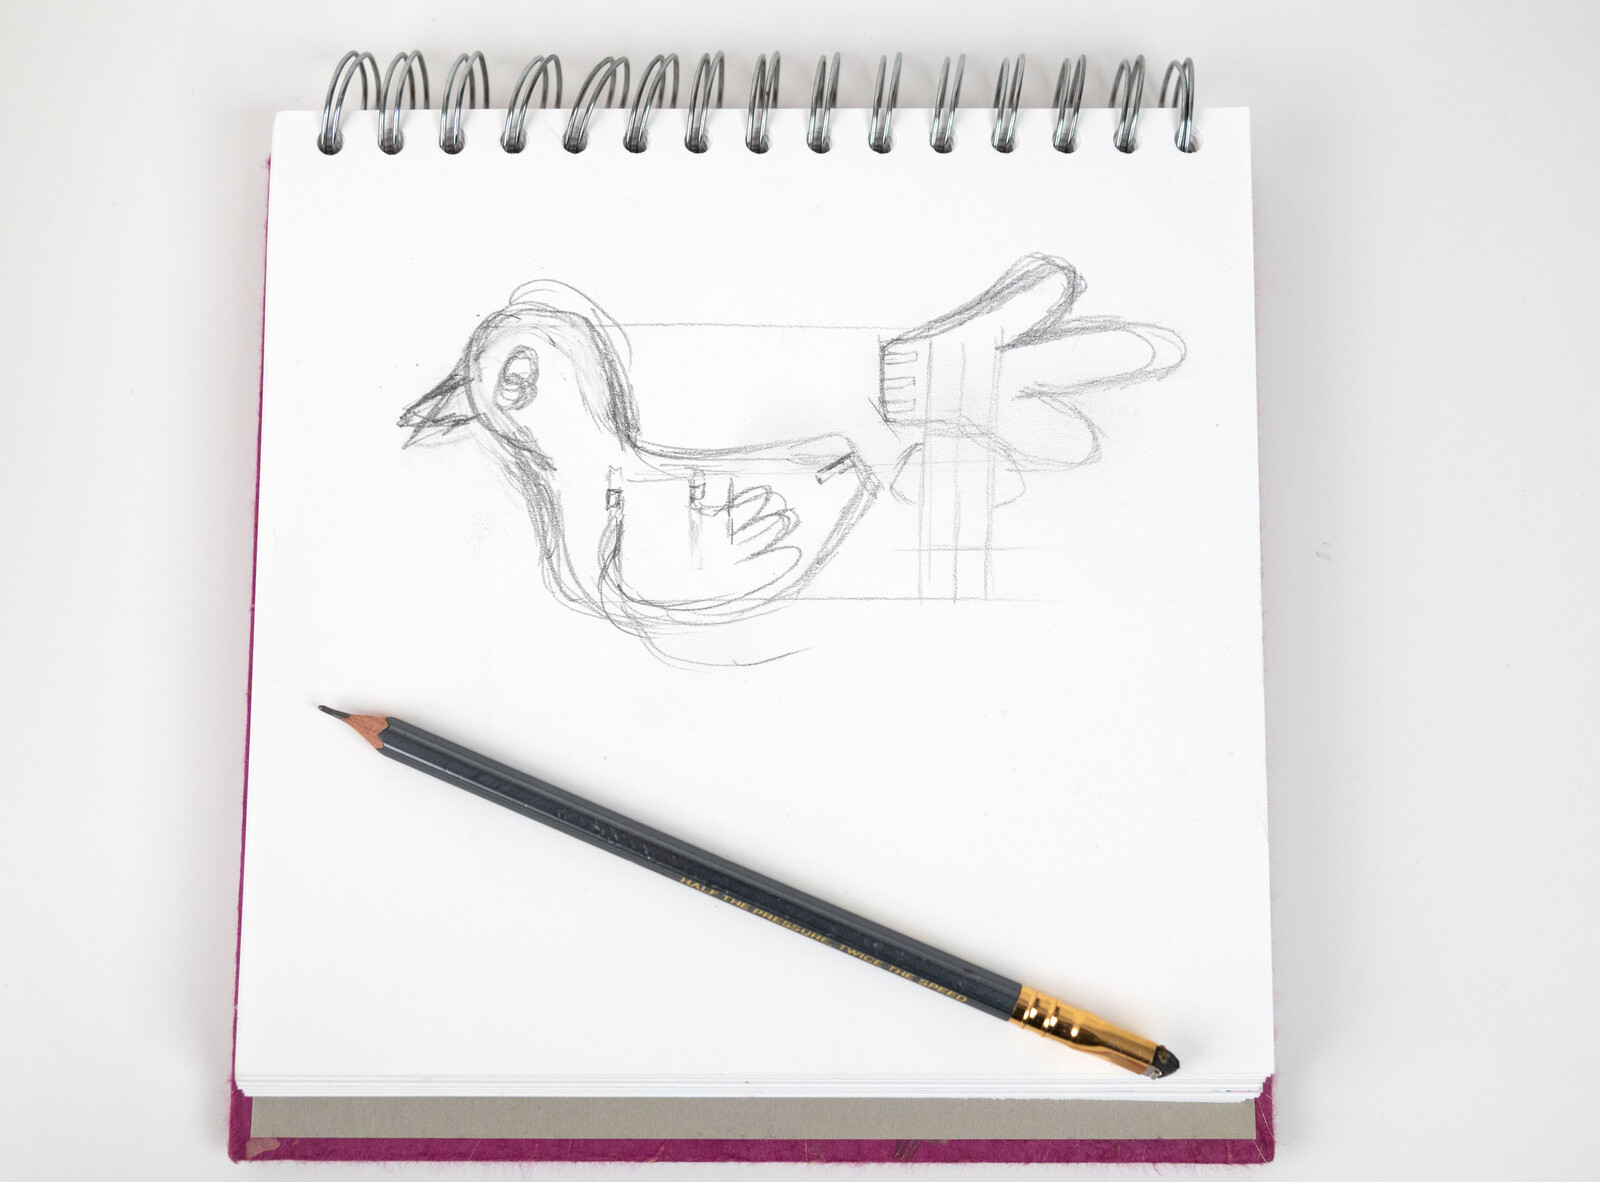 Initial rough sketch. The basic shapes and an idea of how the bird will fit together.